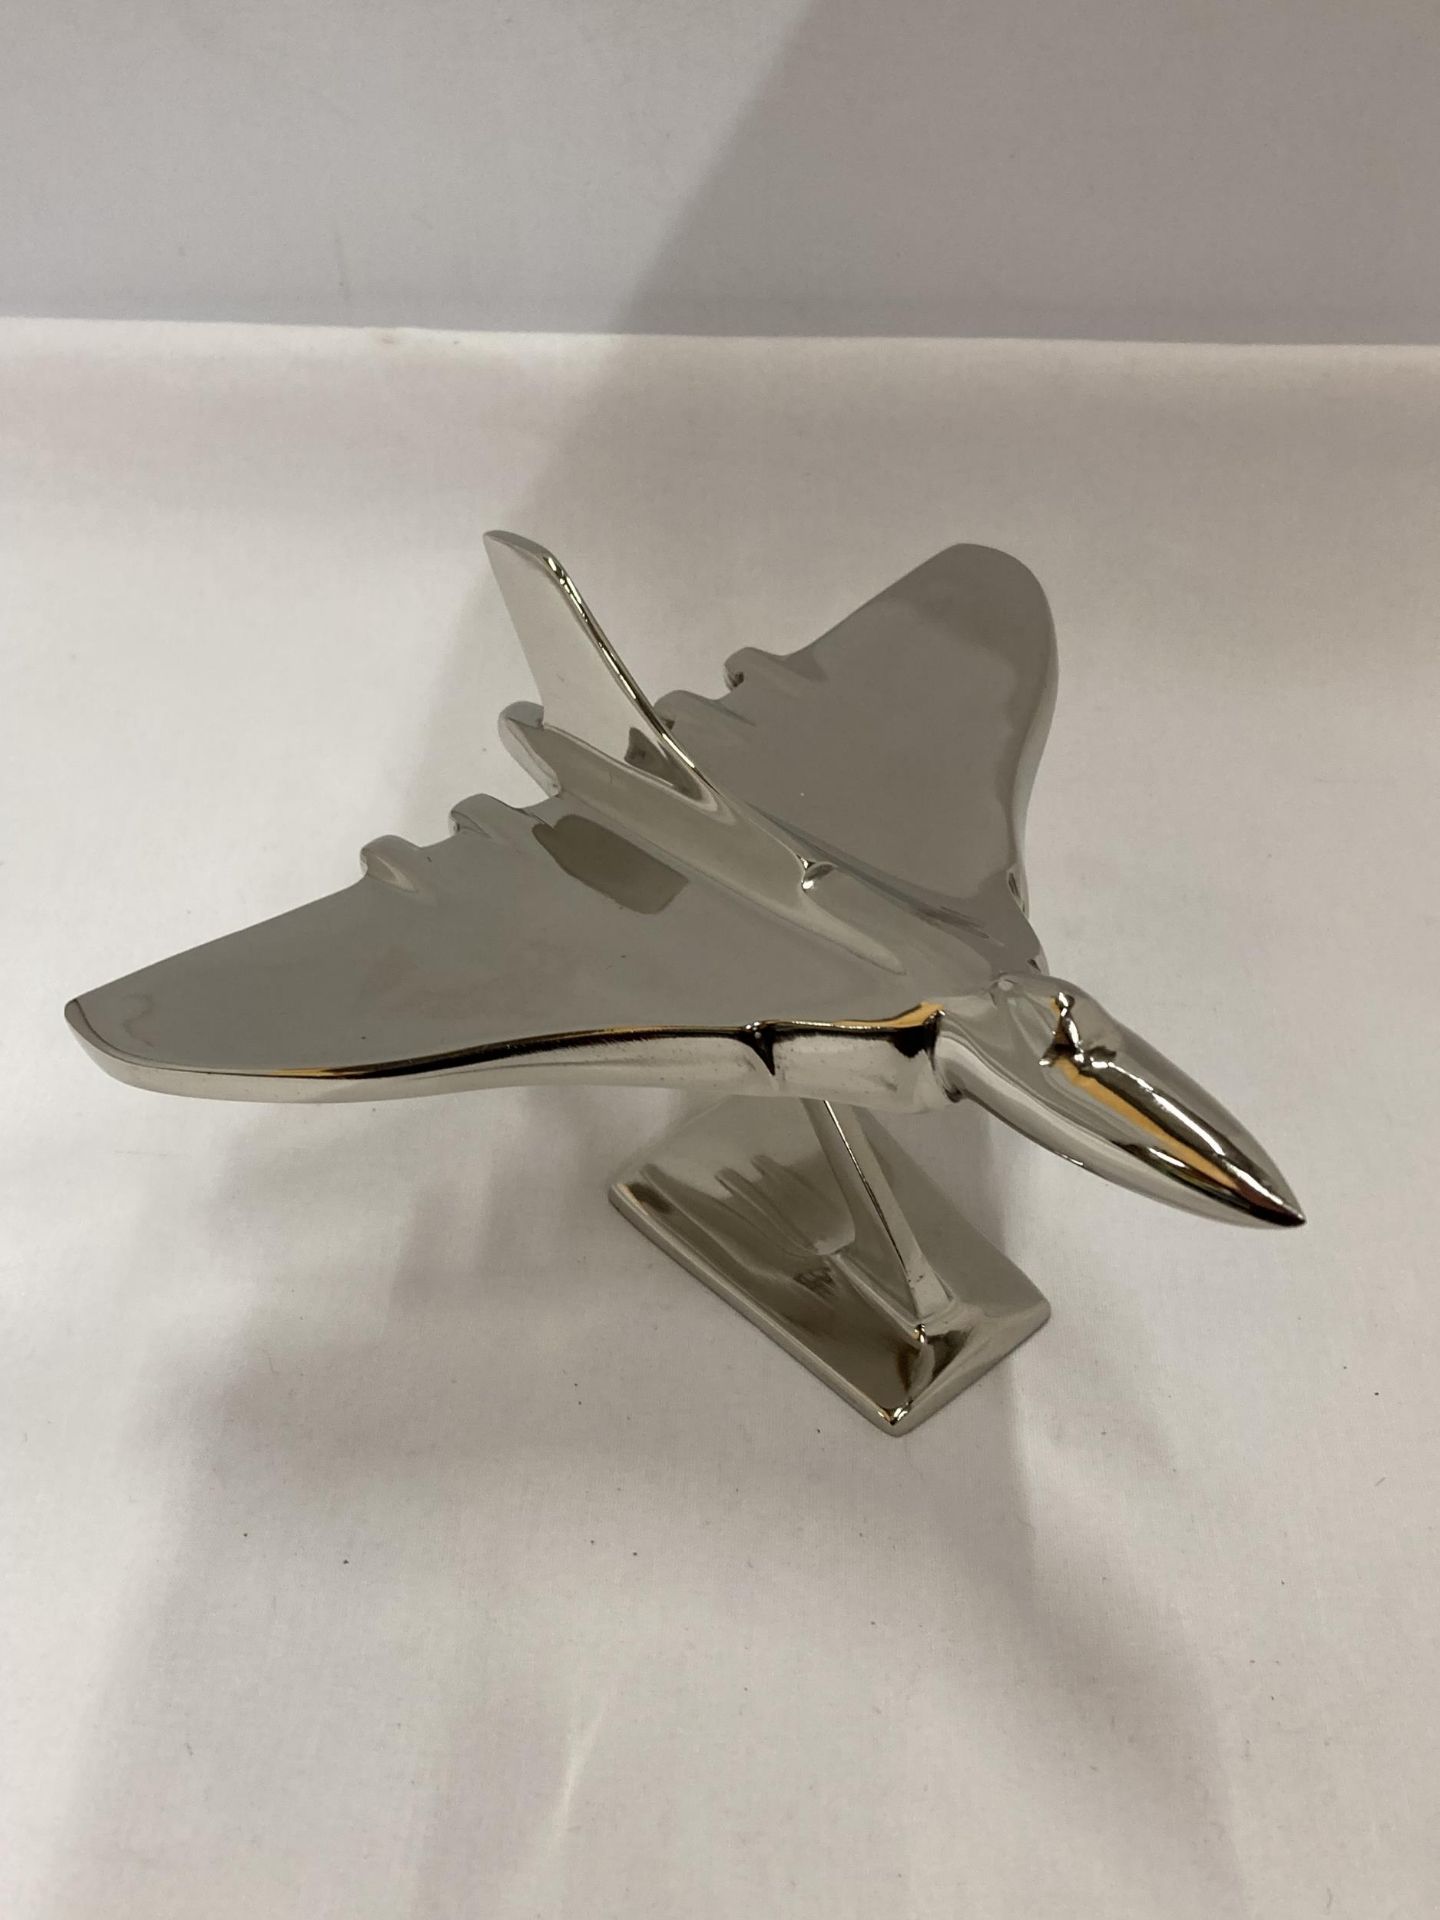 A CHROME MODEL OF A VULCAN BOMBER ON A STAND, HEIGHT 14CM